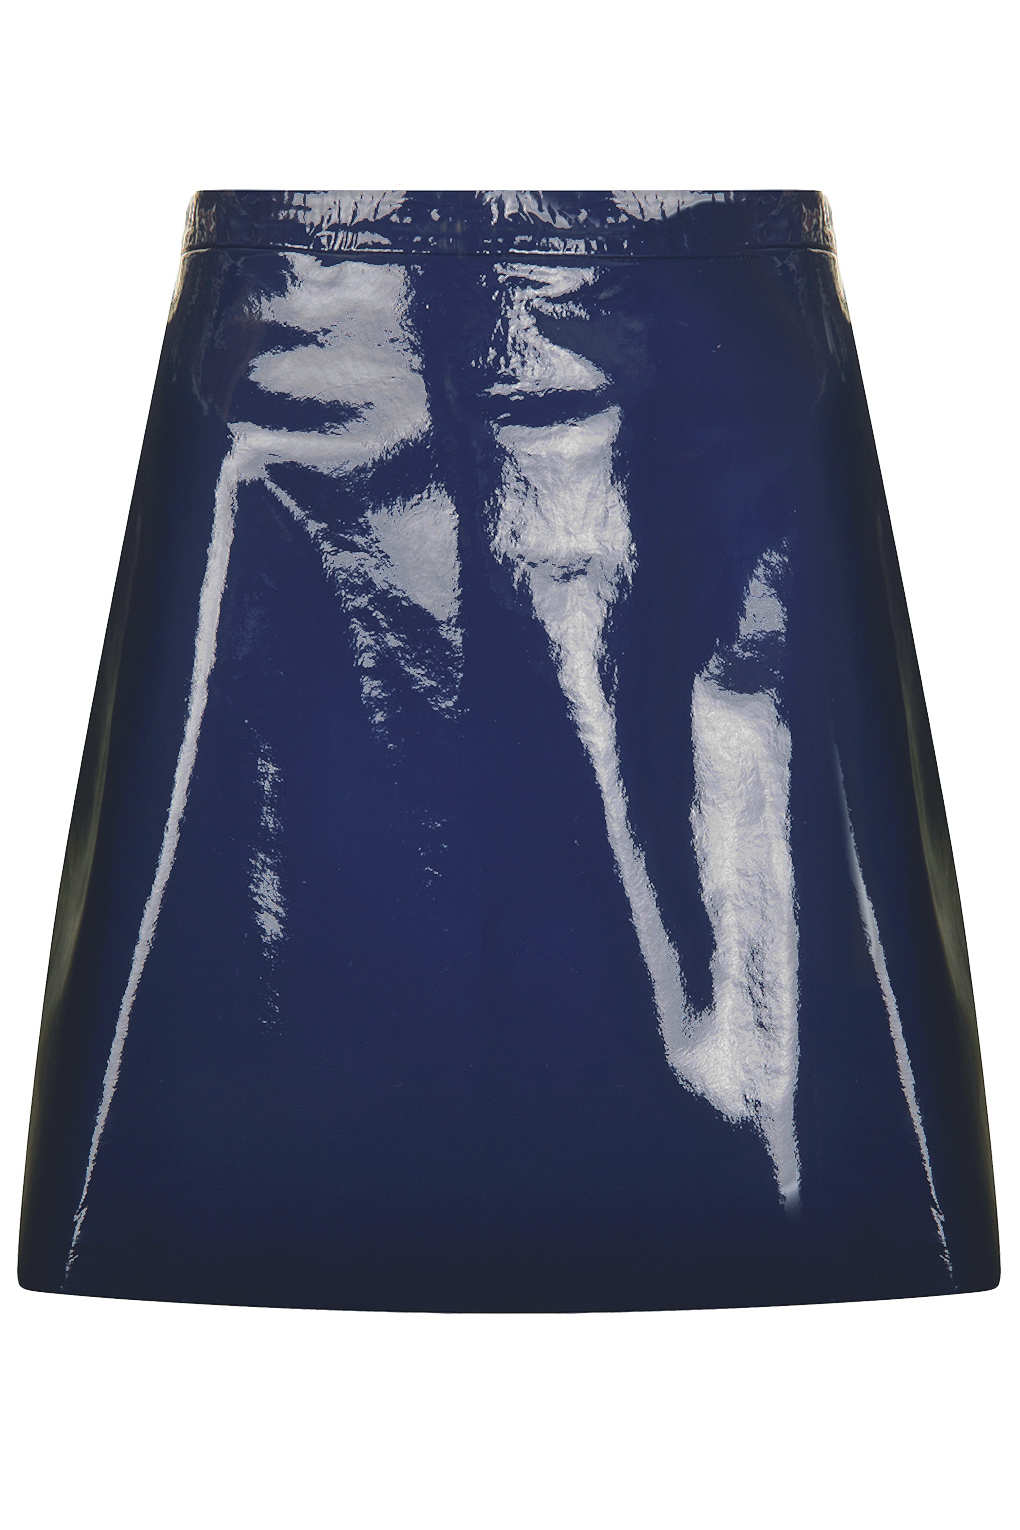 Lyst - Topshop Patent Leather Pelmet Skirt By Boutique in Blue